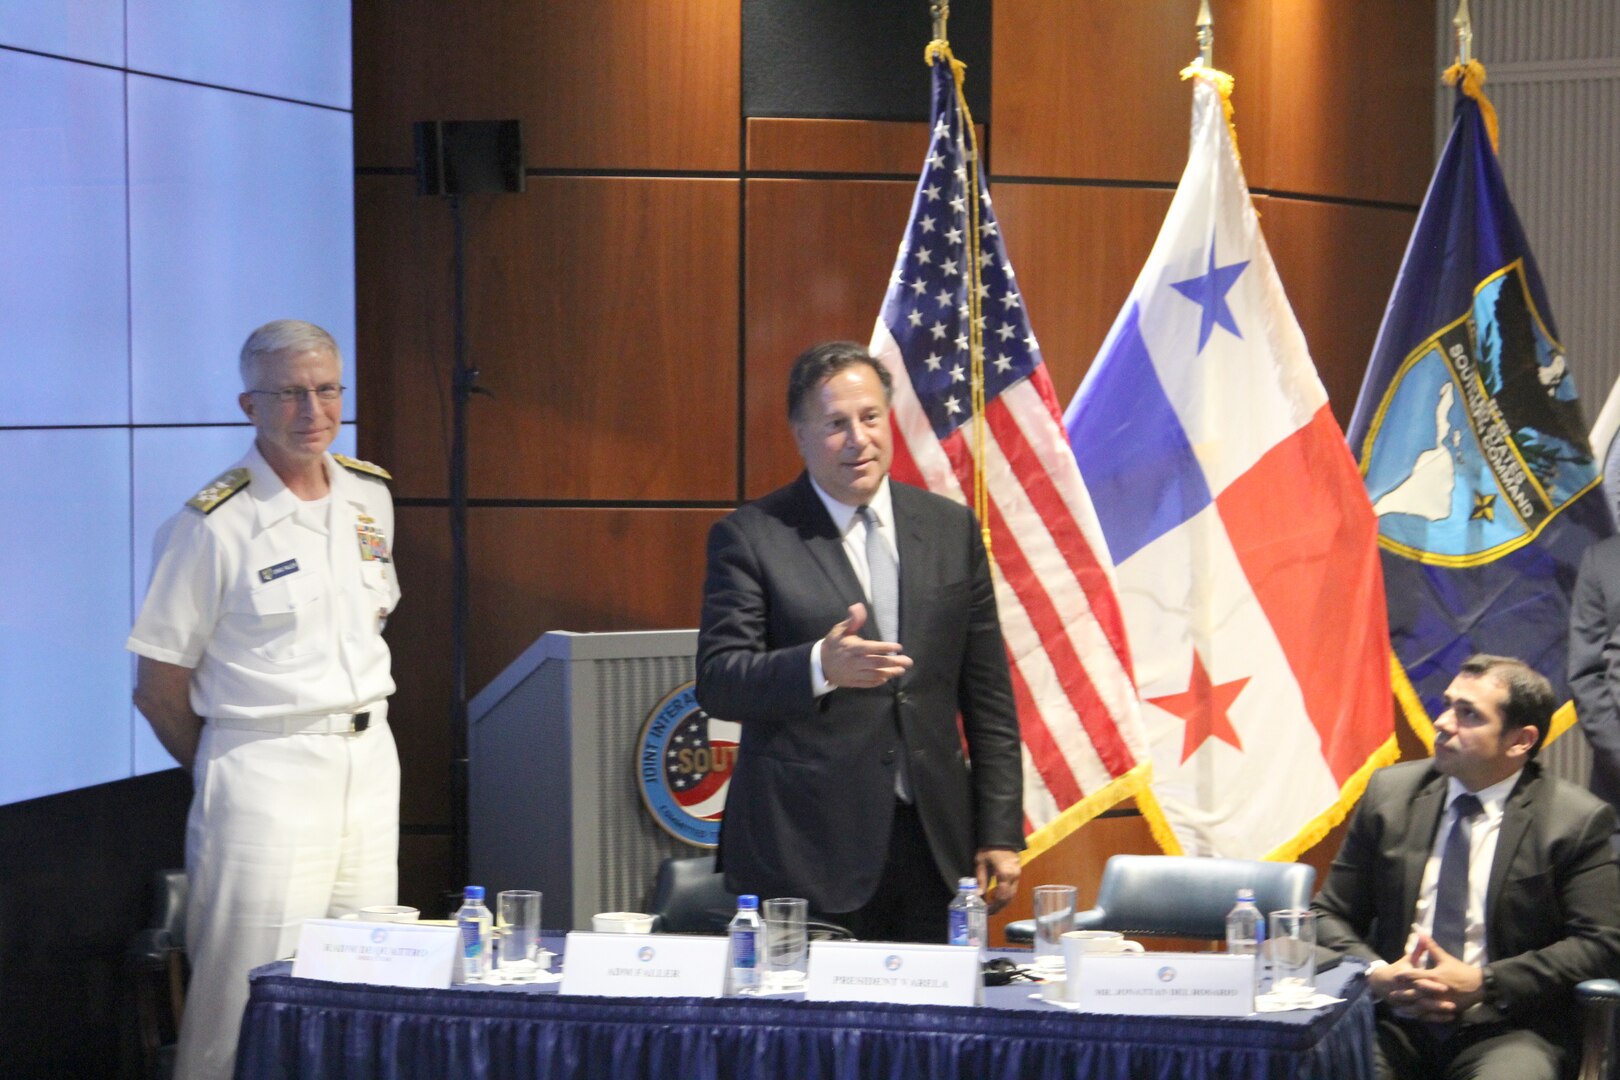 Panamanian President Juan Carlos Varela speaks during his visit to JIATF South. This visit was hosted by Navy Adm. Craig Faller, Commander of U.S. Southern Command, and Coast Guard Rear Adm. Pat DeQuattro, JIATF South Director.